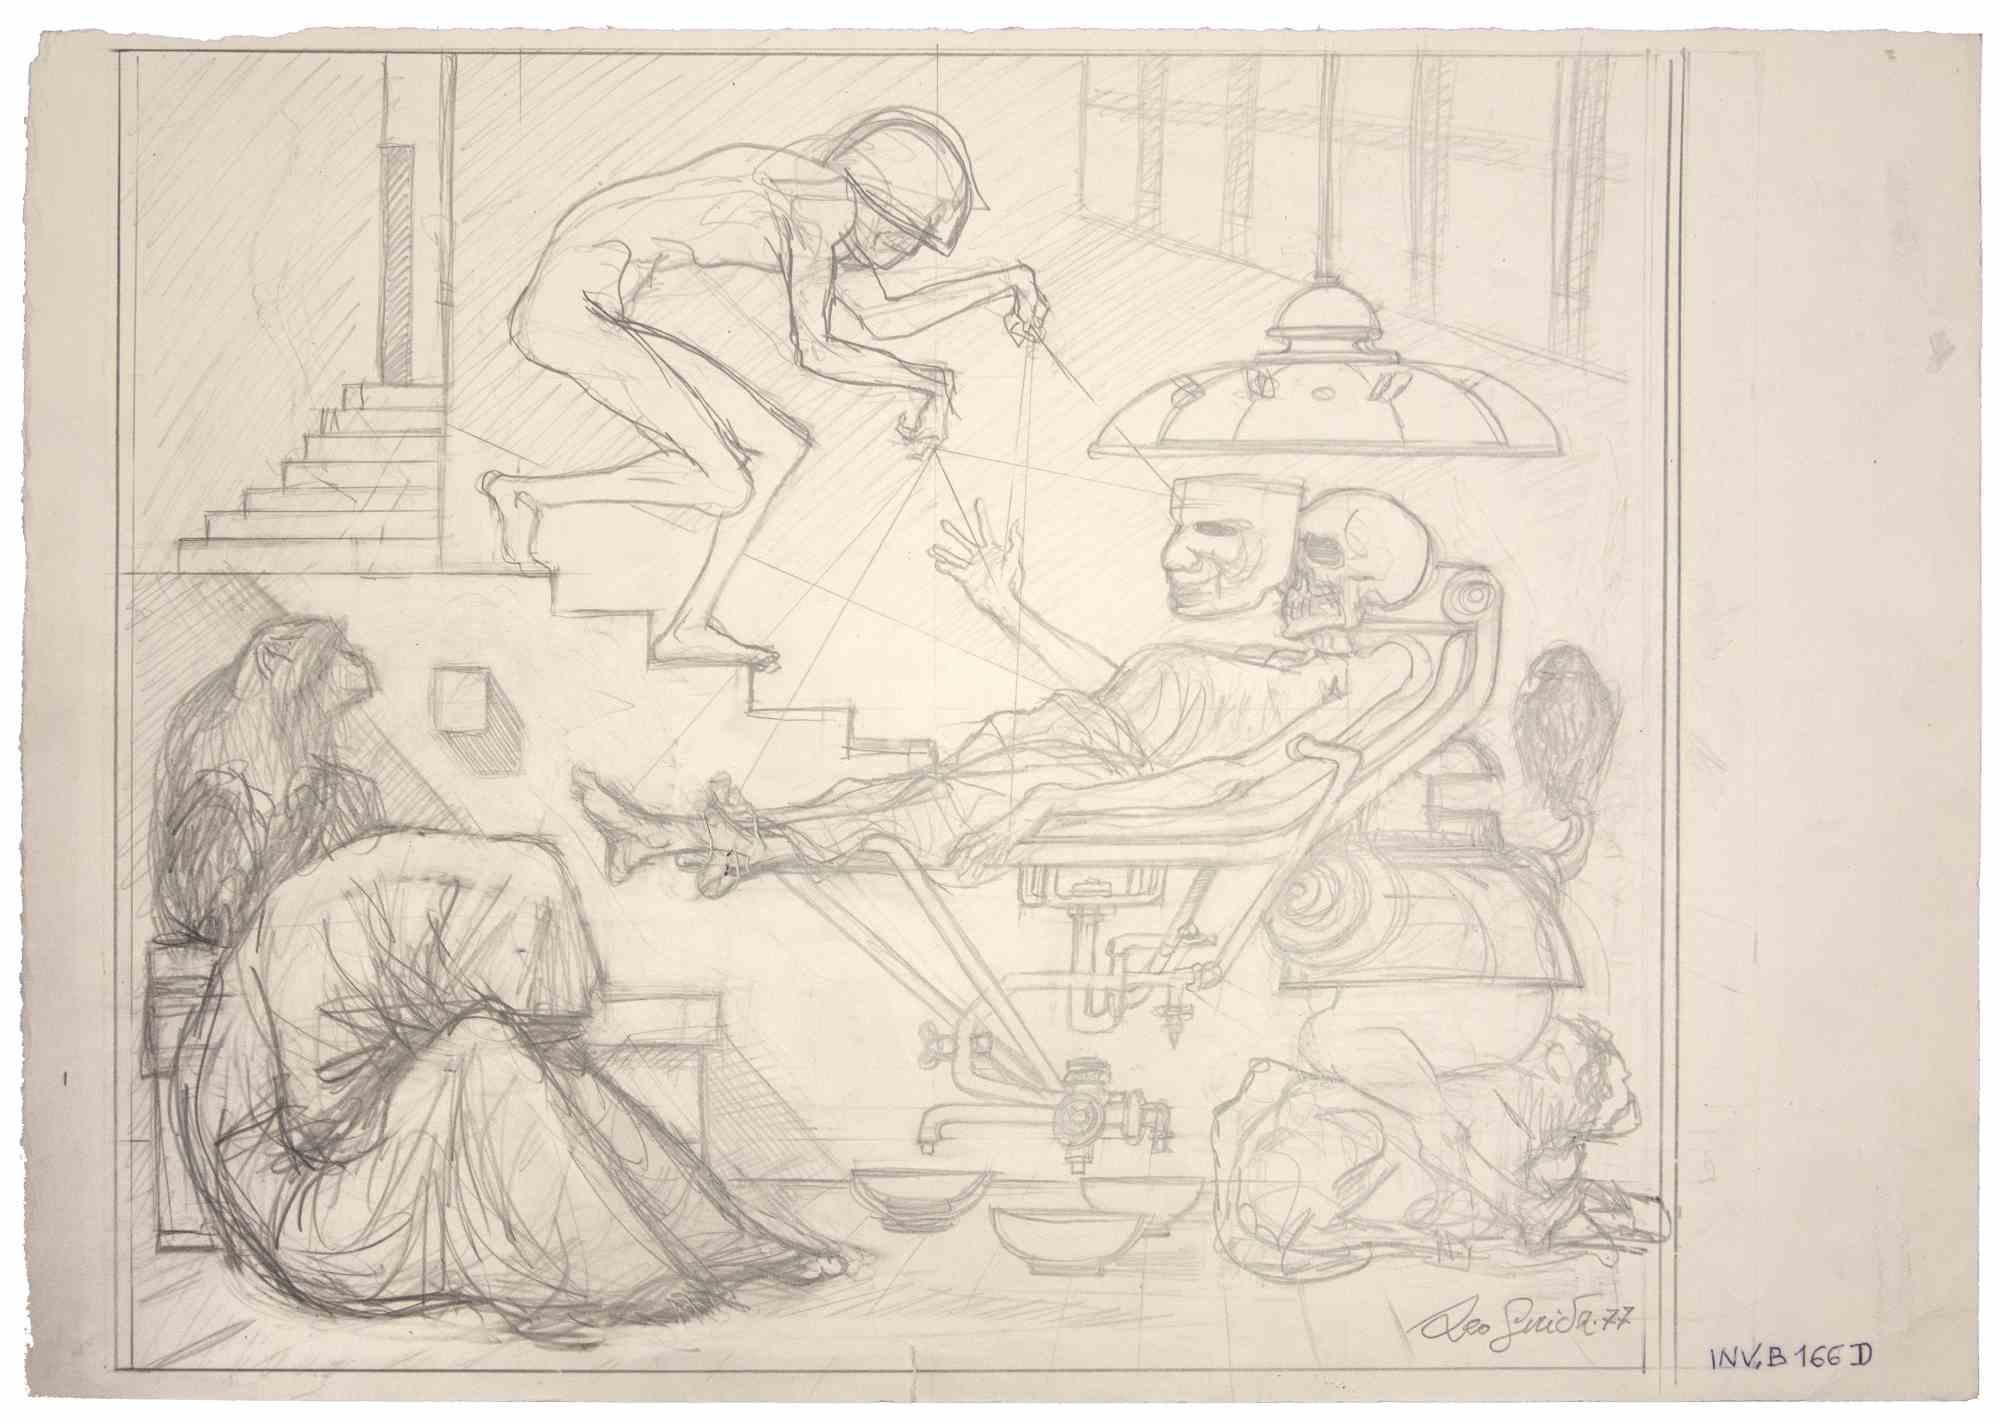 Agony is an original artwork realized  in 1977  by the italian Contemporary artist  Leo Guida  (1992 - 2017).

Original drawing pencil on ivory-colored paper.
 
Hand-signed and dated on the lower margin. Cat. INV.B 166D

In this artwork are